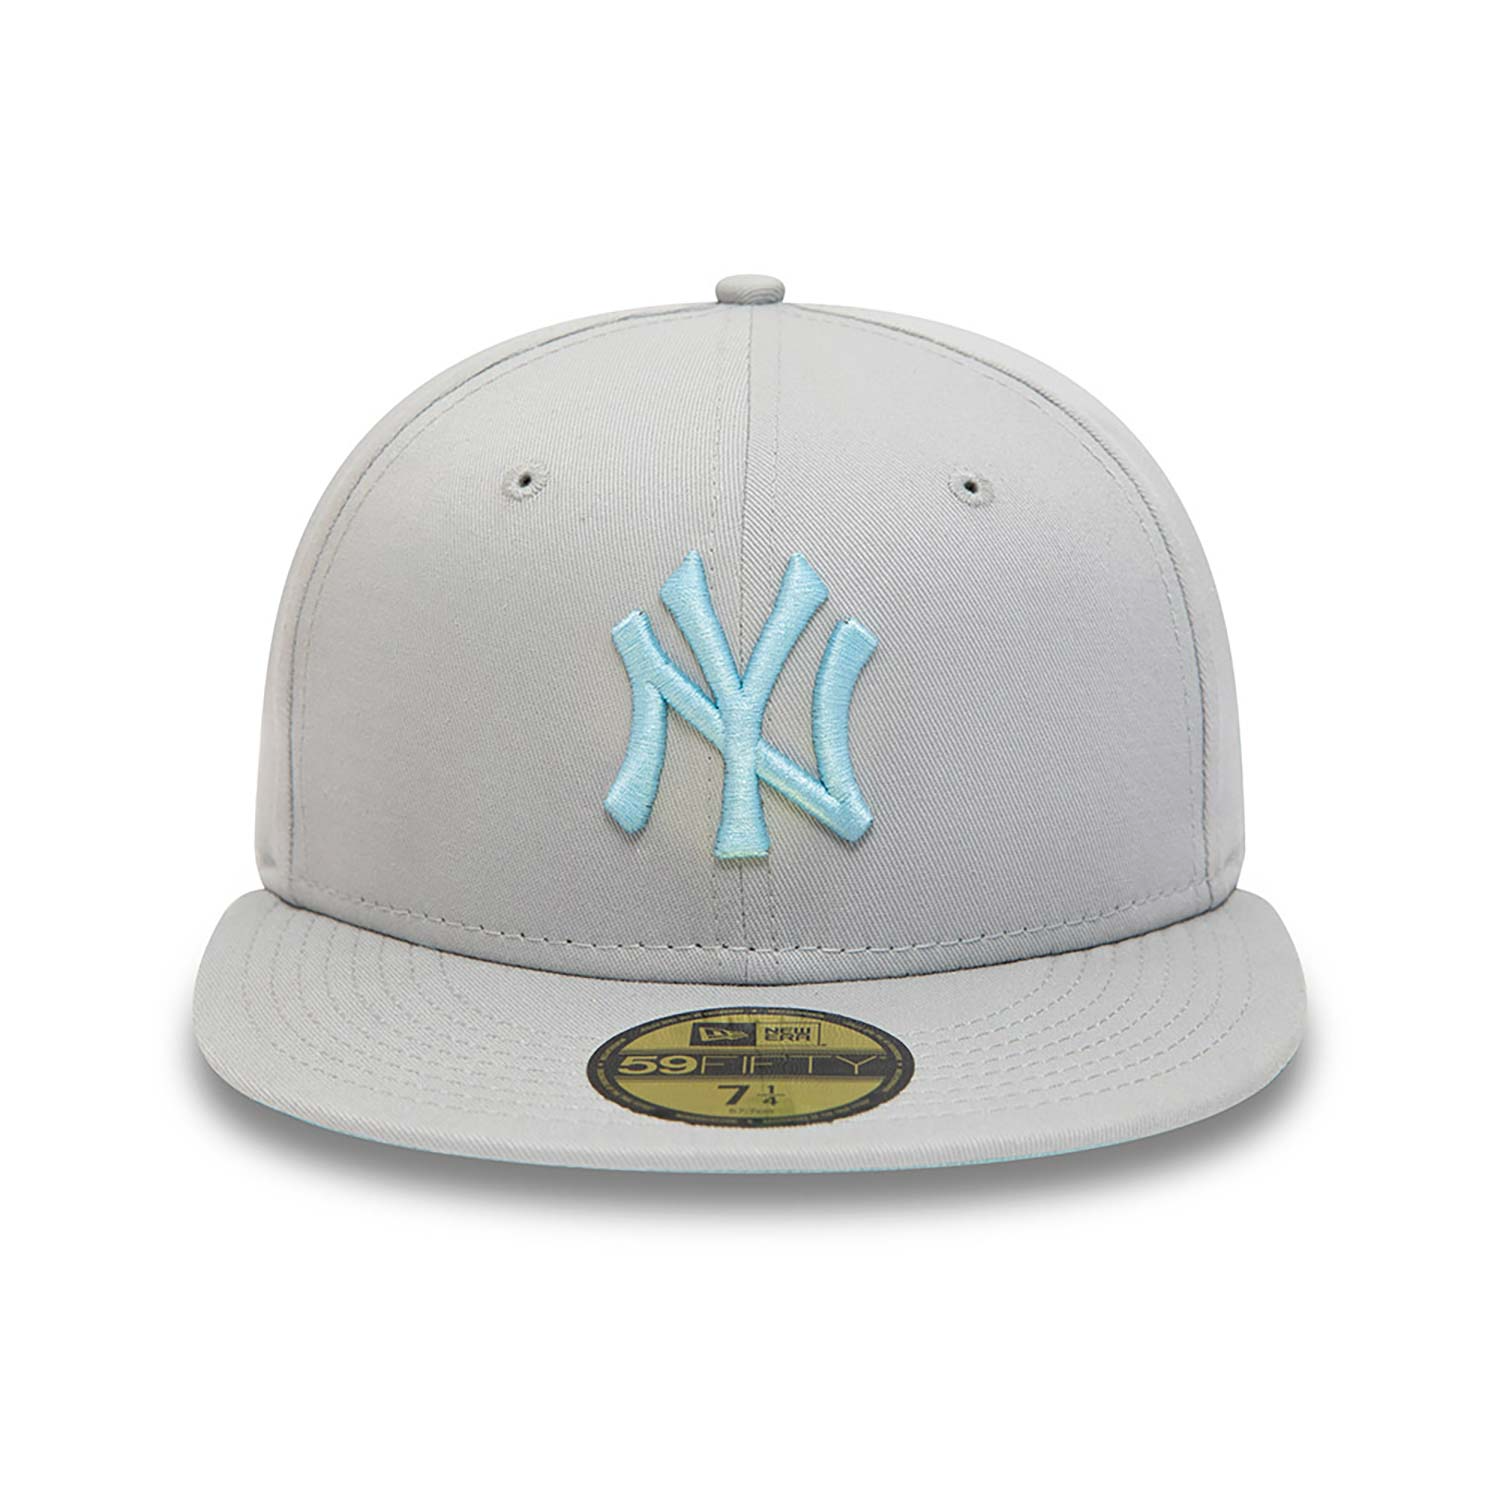 NEW YORK YANKEES LEAGUE ESSENTIAL GREY 59FIFTY FITTED CAP